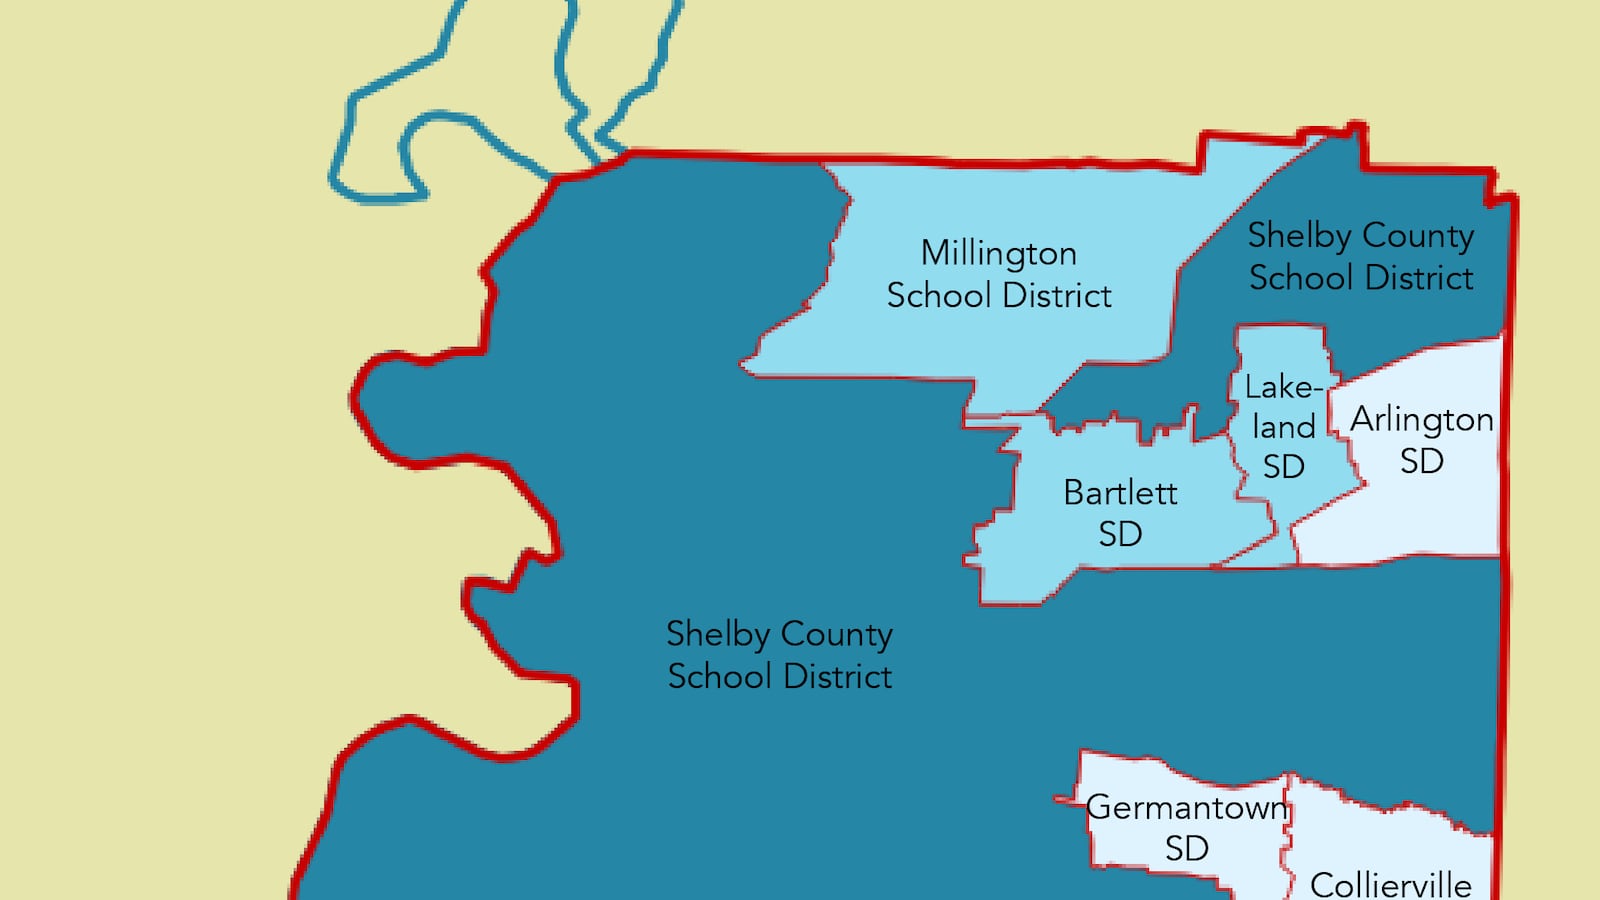 Six municipal school districts were created near Memphis in 2014 after splitting off from newly consolidated Shelby County Schools.